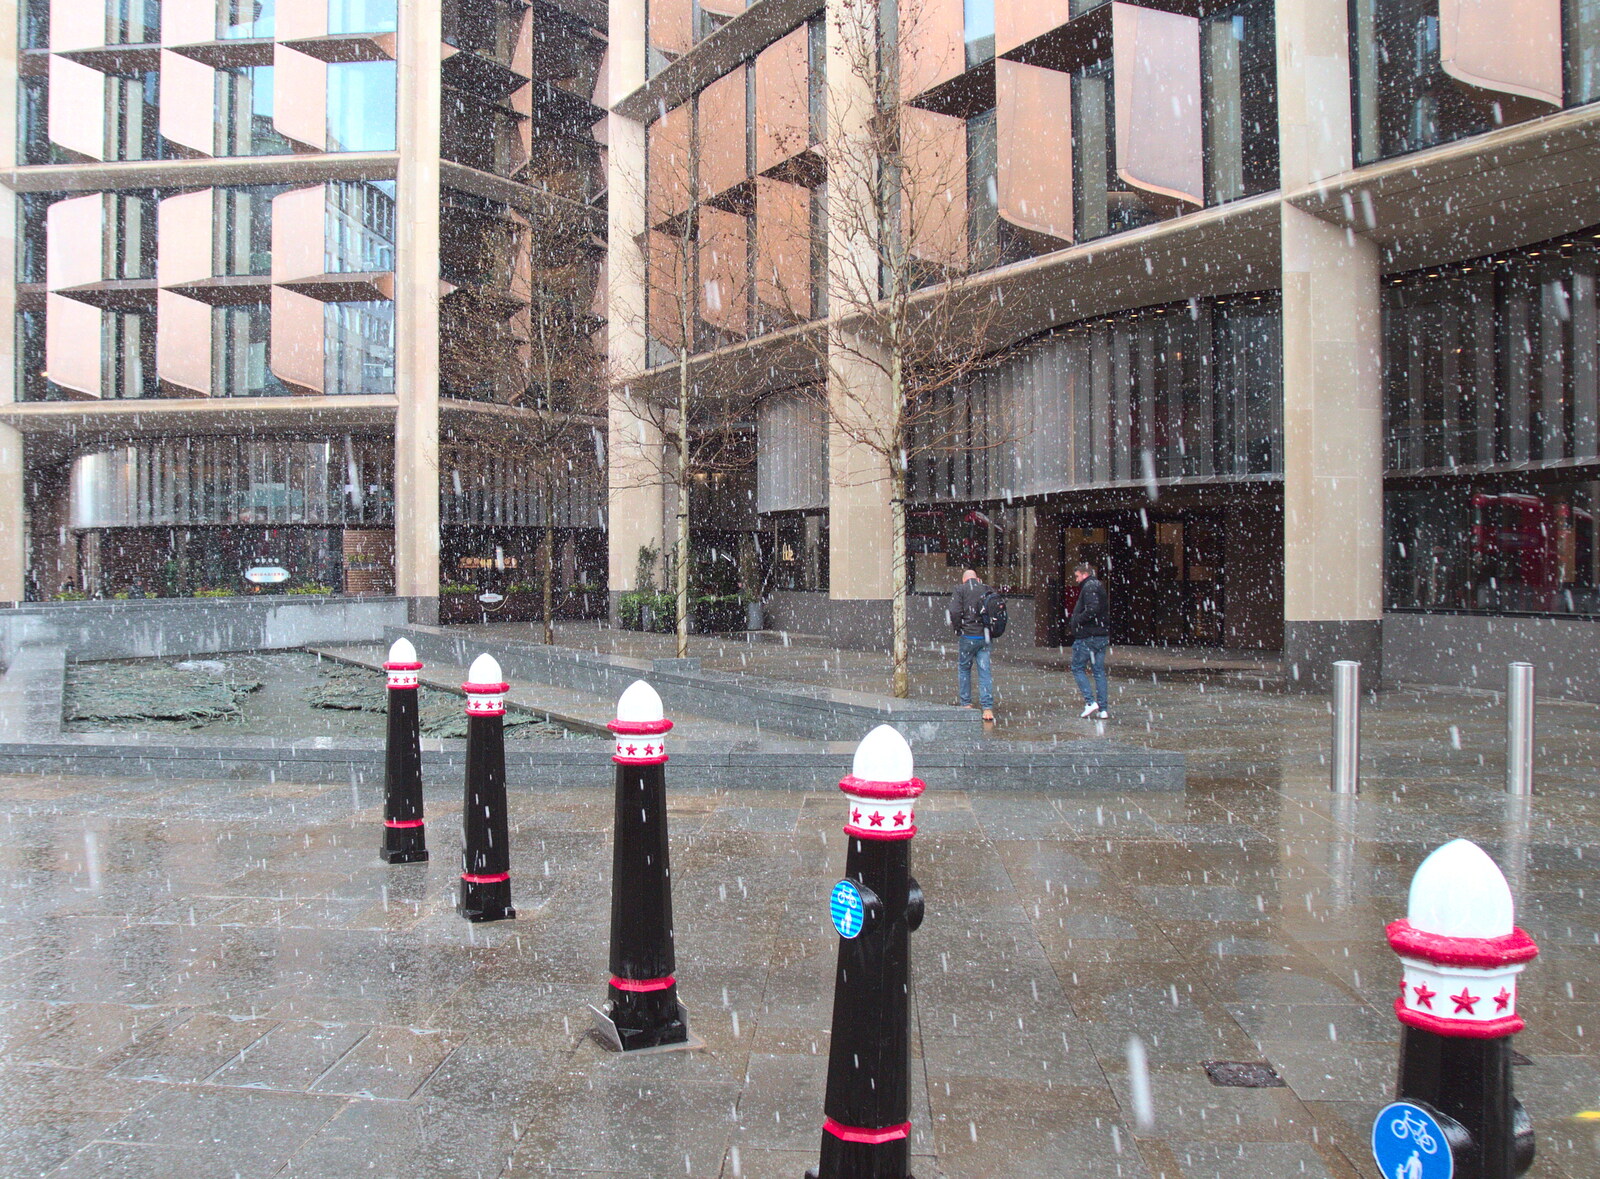 Snow and bollards outside the Bloomberg Building from An April Miscellany: Snow and Cycling, Suffolk and London - 4th April 2019